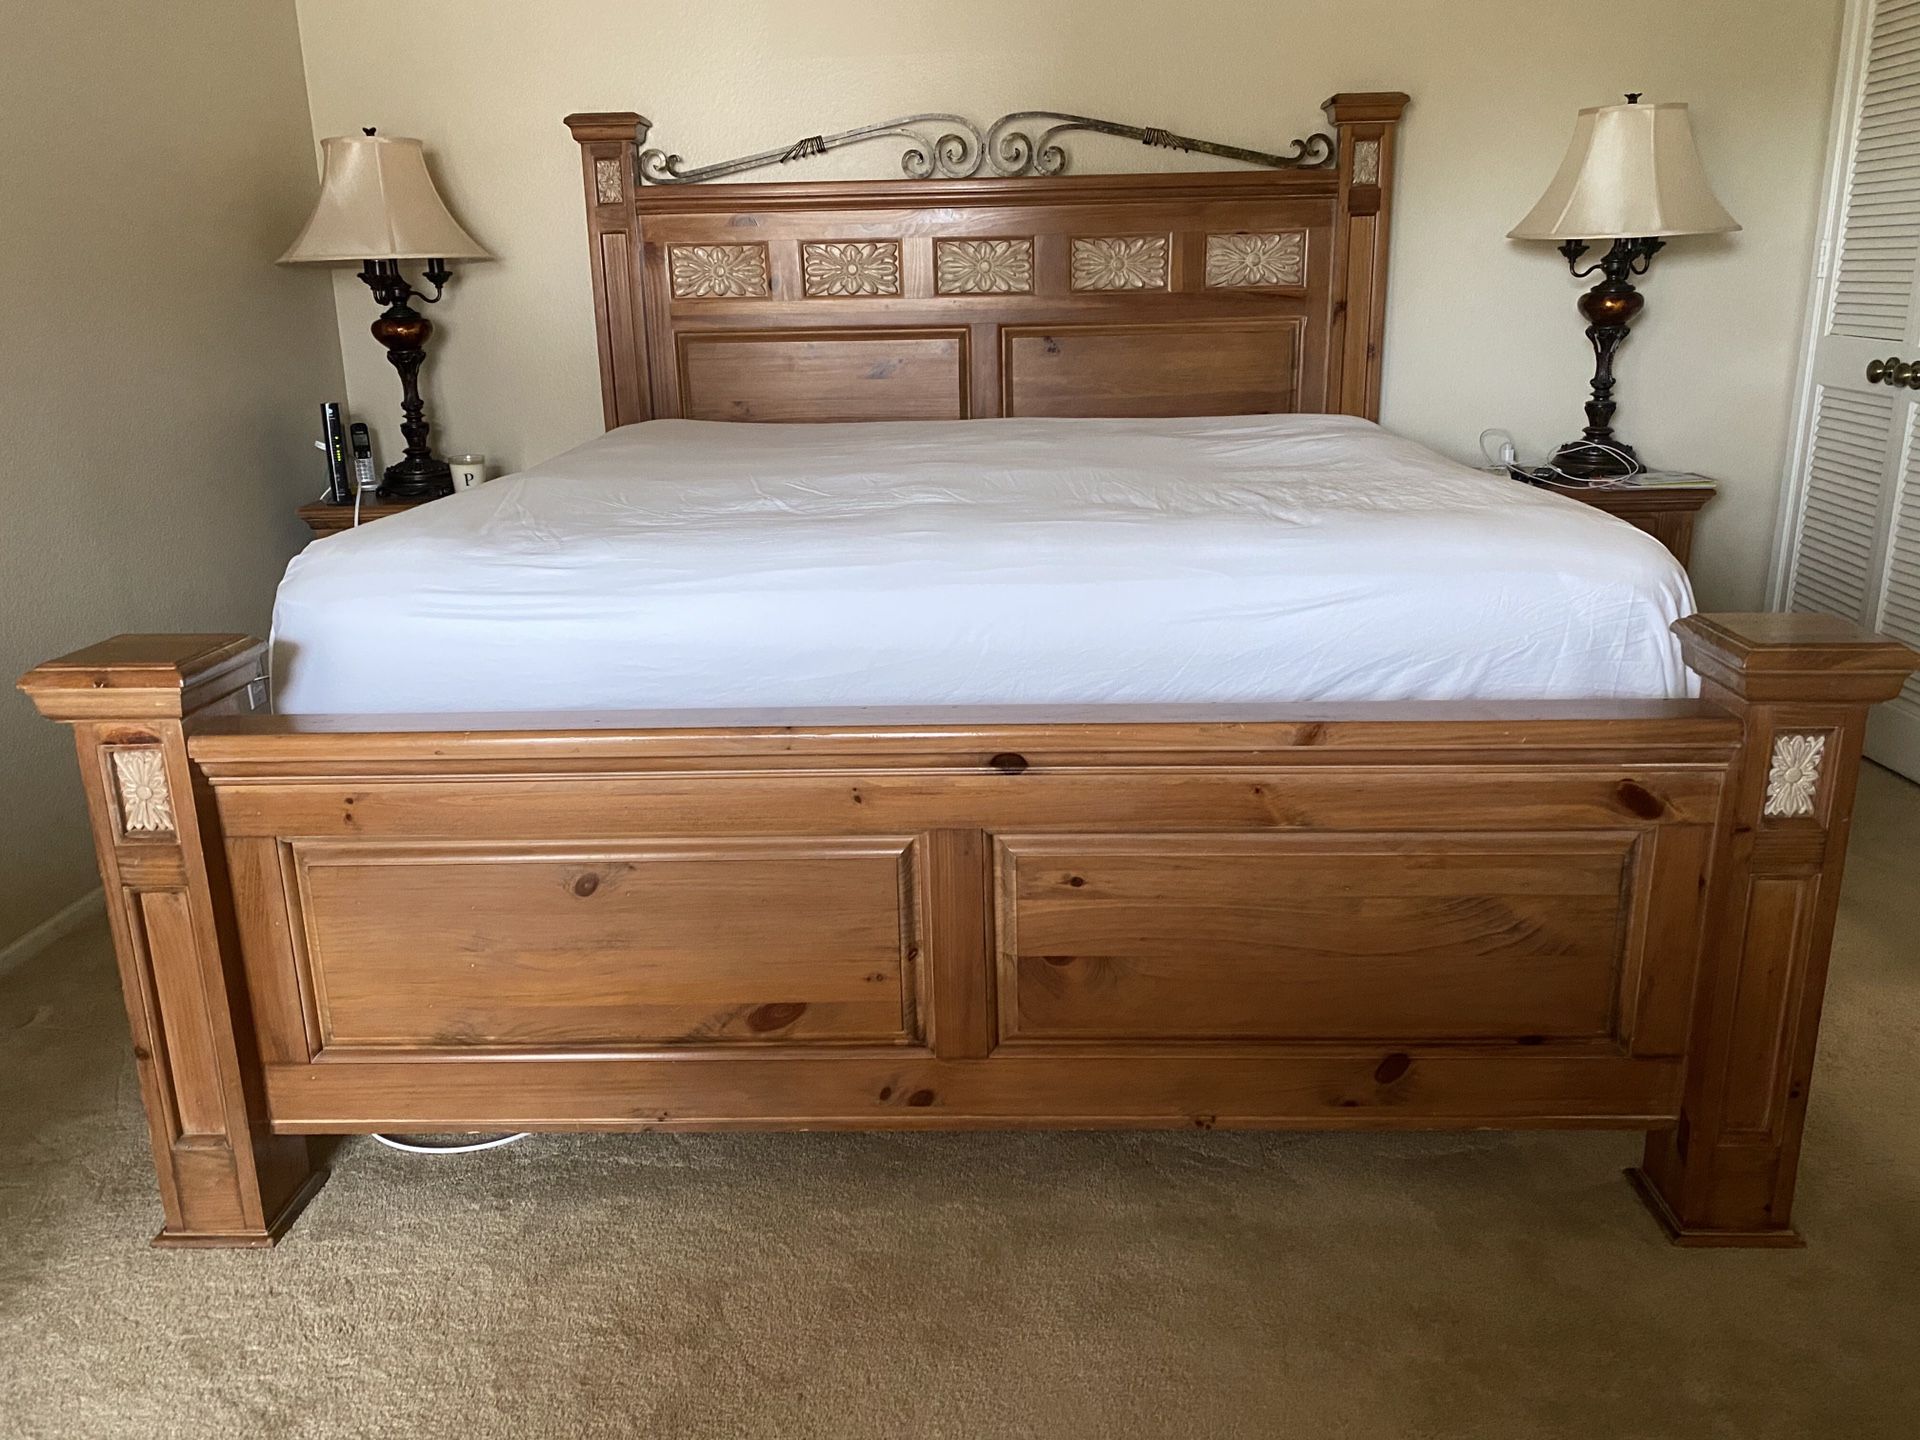 5 PC KING SIZE COMPLETE BEDROOM SET - ALL WOOD